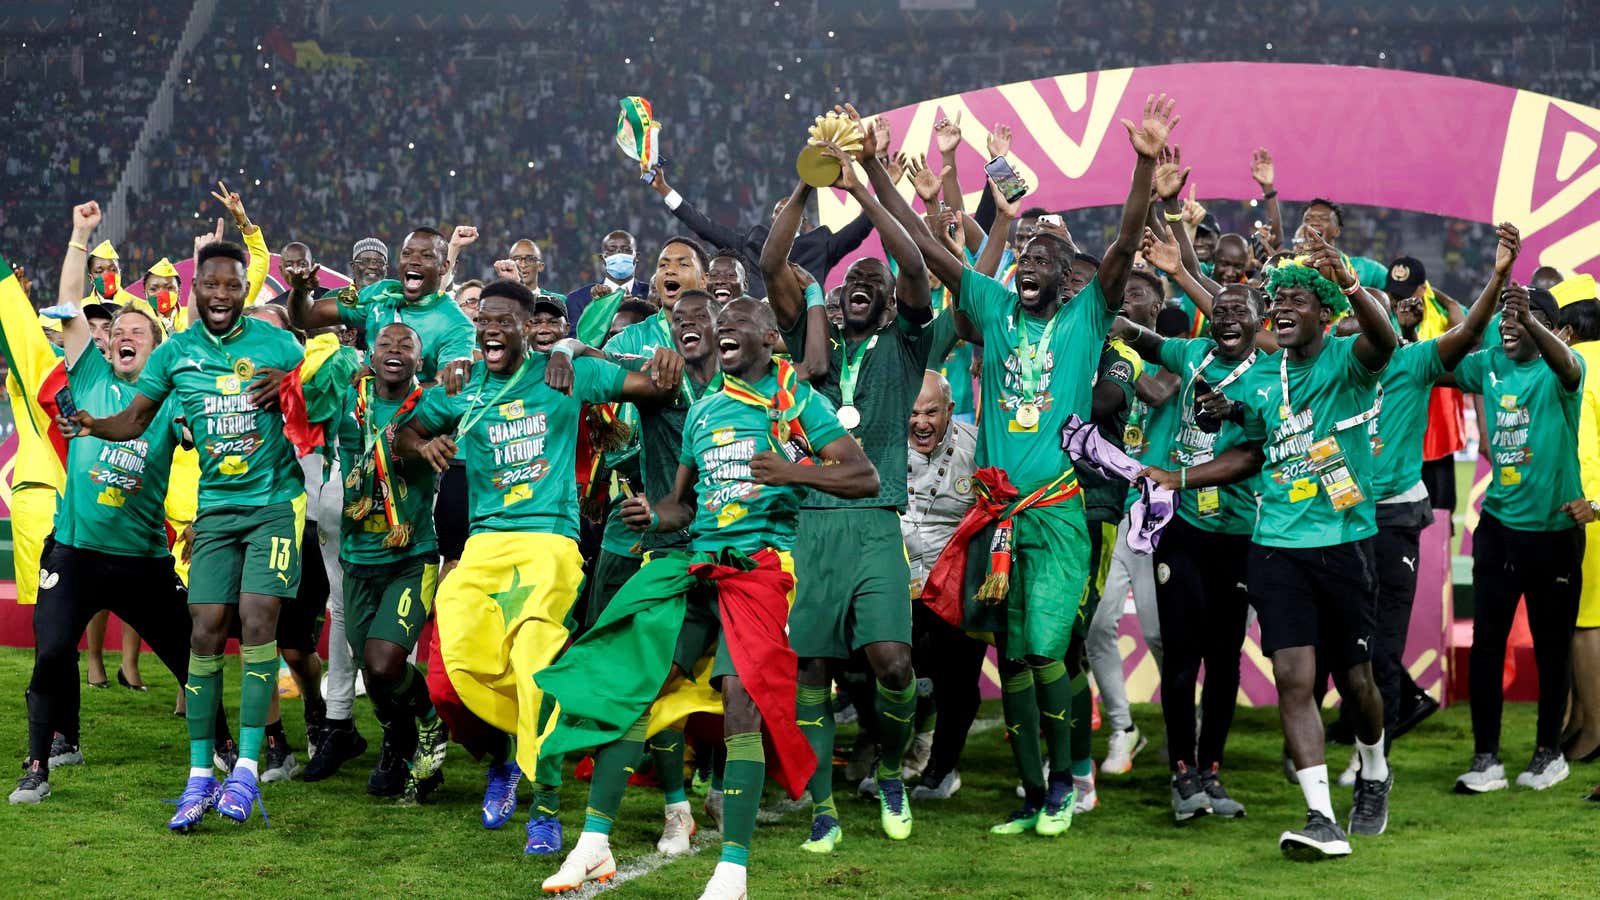 Demand for African football talent is growing worldwide.